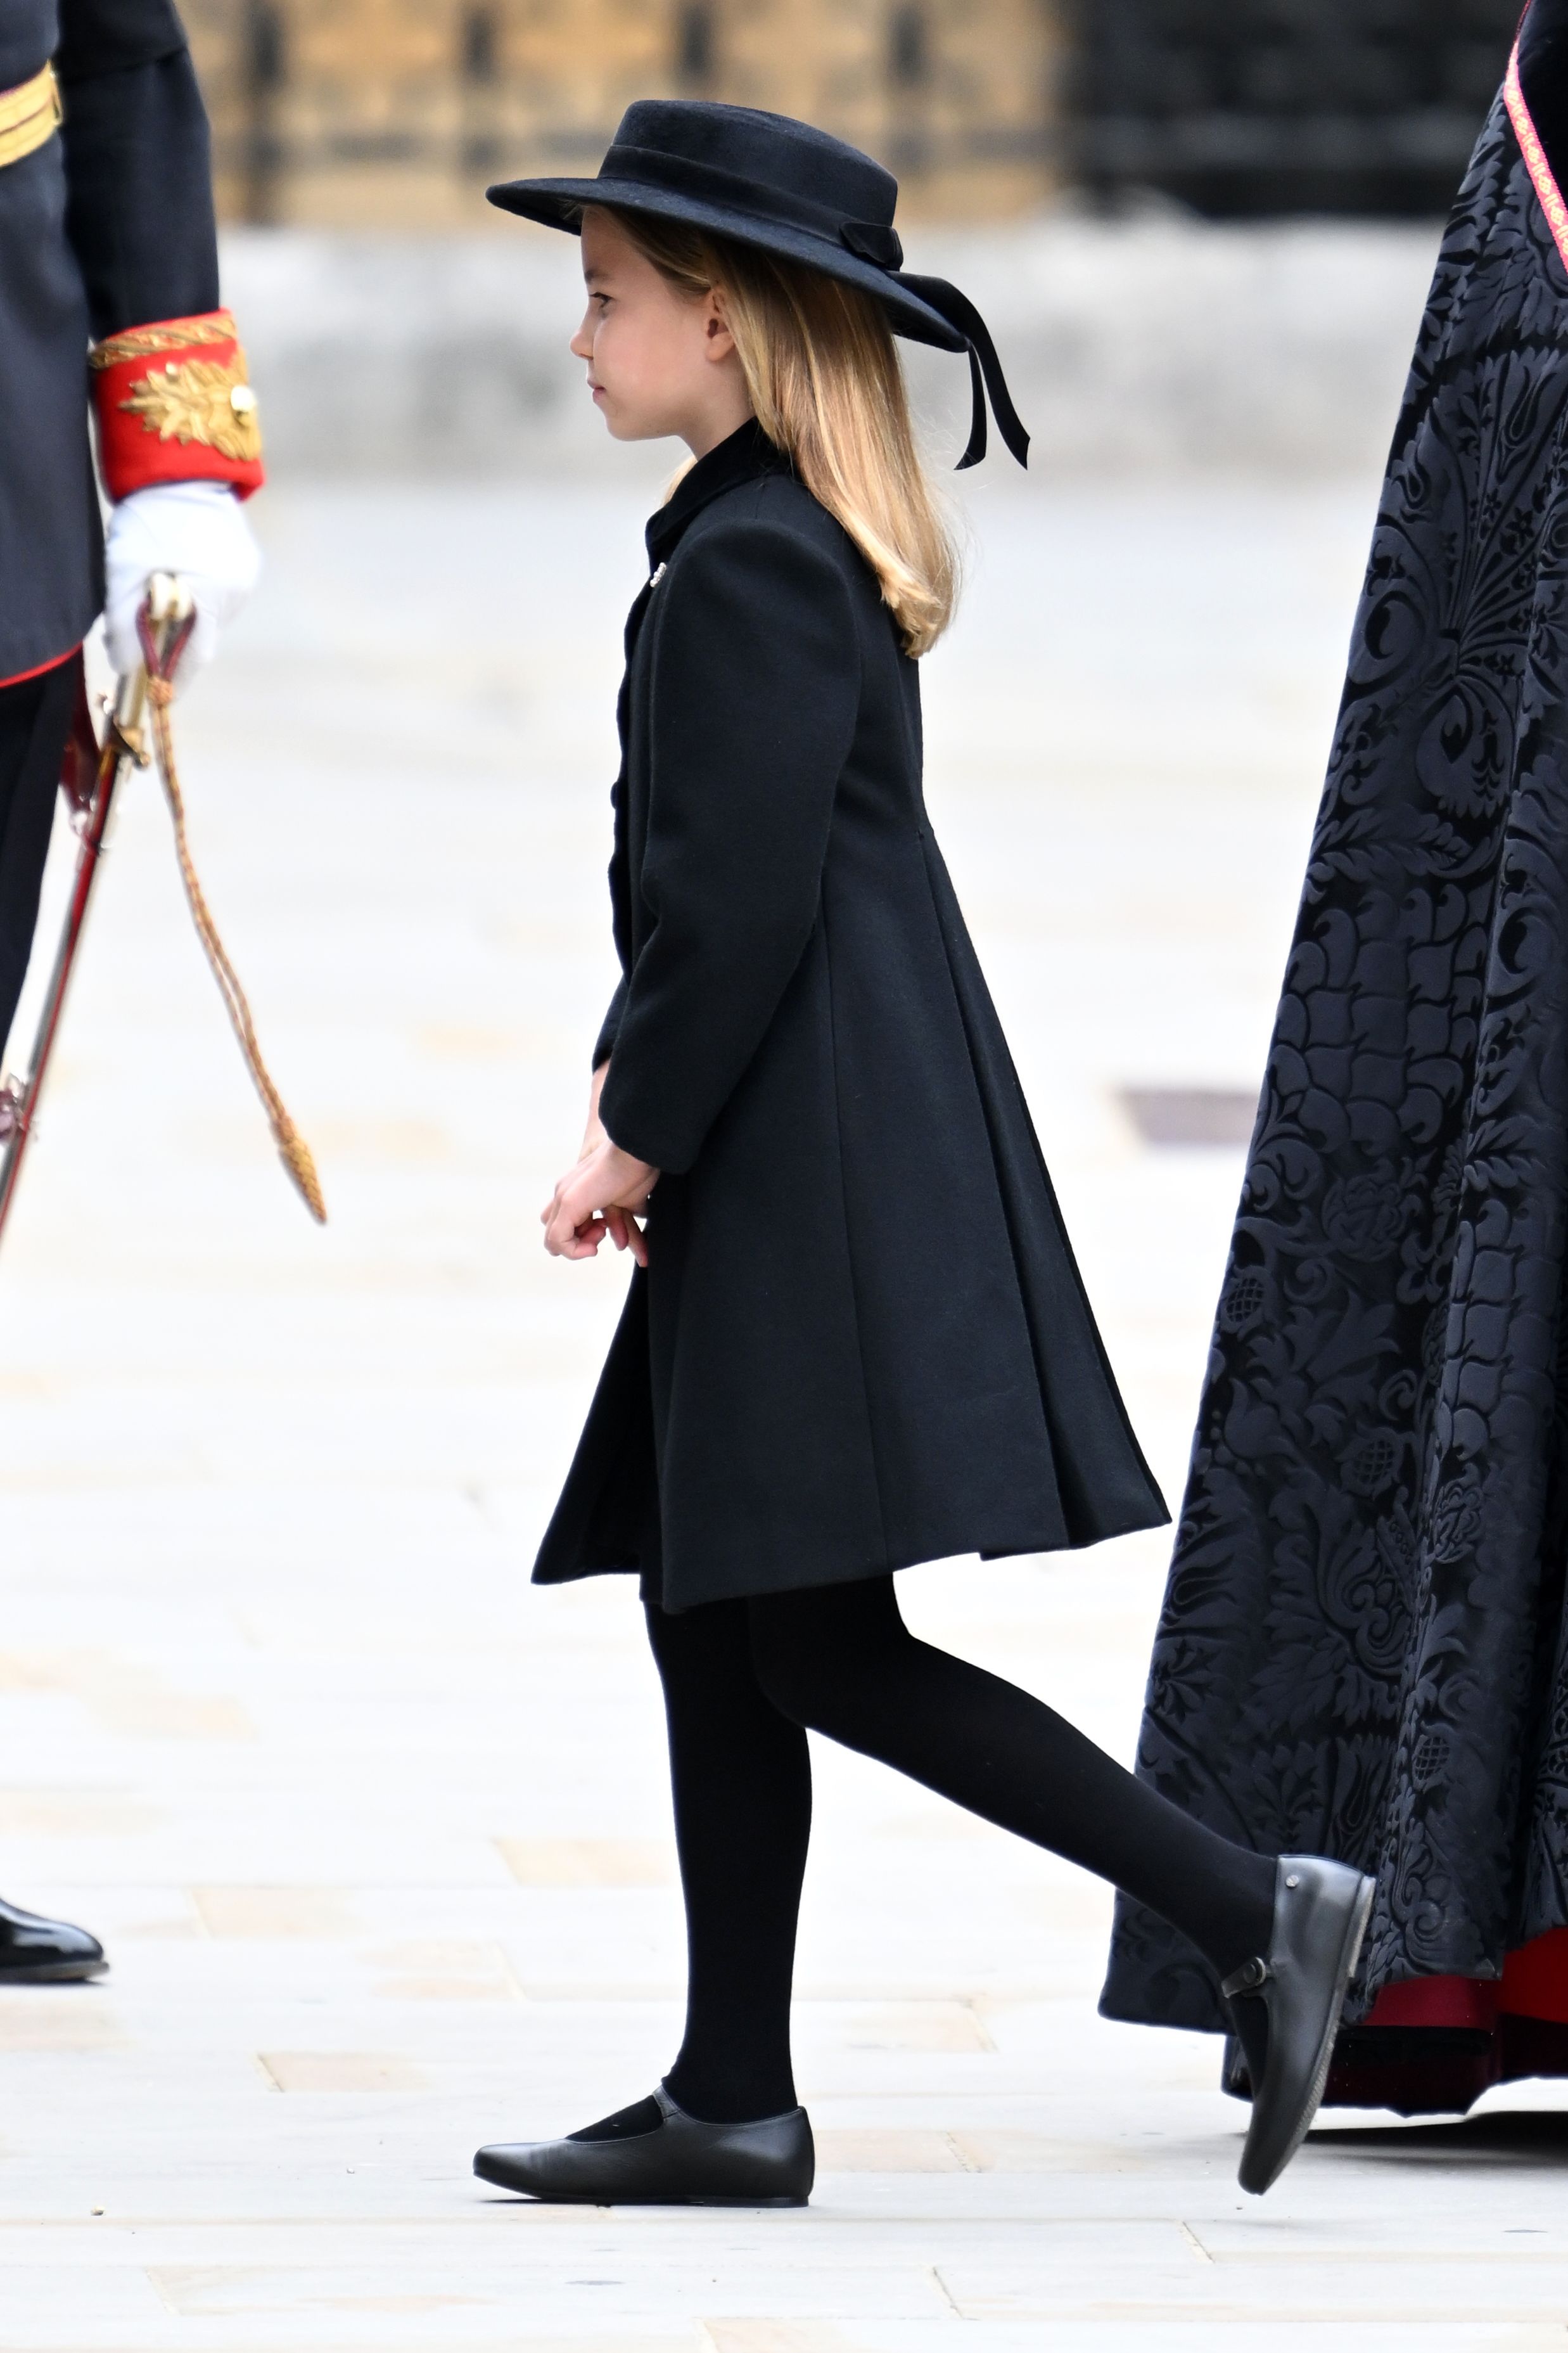 <p>Princess Charlotte was a mini-me version of mom Princess Kate as she arrived at London's Westminster Abbey for <a href="https://www.wonderwall.com/celebrity/royals/best-photos-from-queen-elizabeth-ii-funeral-king-charles-princes-william-prince-harry-george-charlotte-kate-meghan652347.gallery">the state funeral</a> of her great-grandmother Queen Elizabeth II on Sept. 19, 2022.</p>